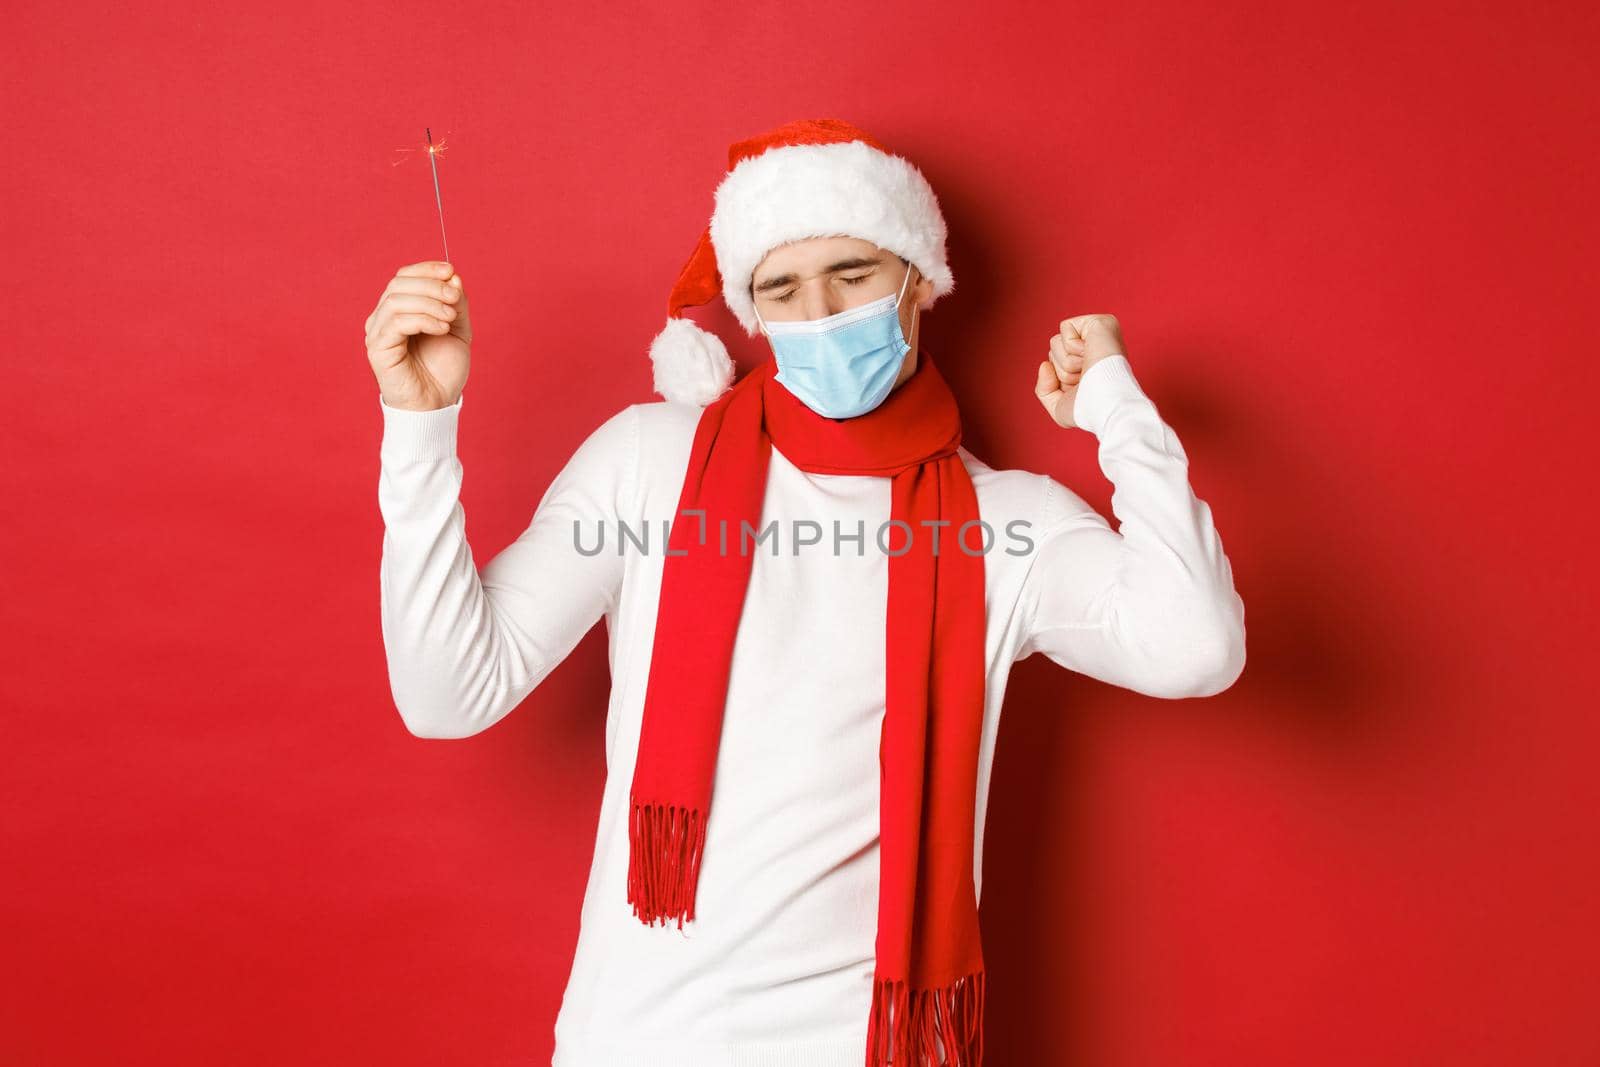 Concept of covid-19, christmas and holidays during pandemic. Happy man celebrating new year at party, wearing medical mask and santa hat, dancing with sparkler against red background.